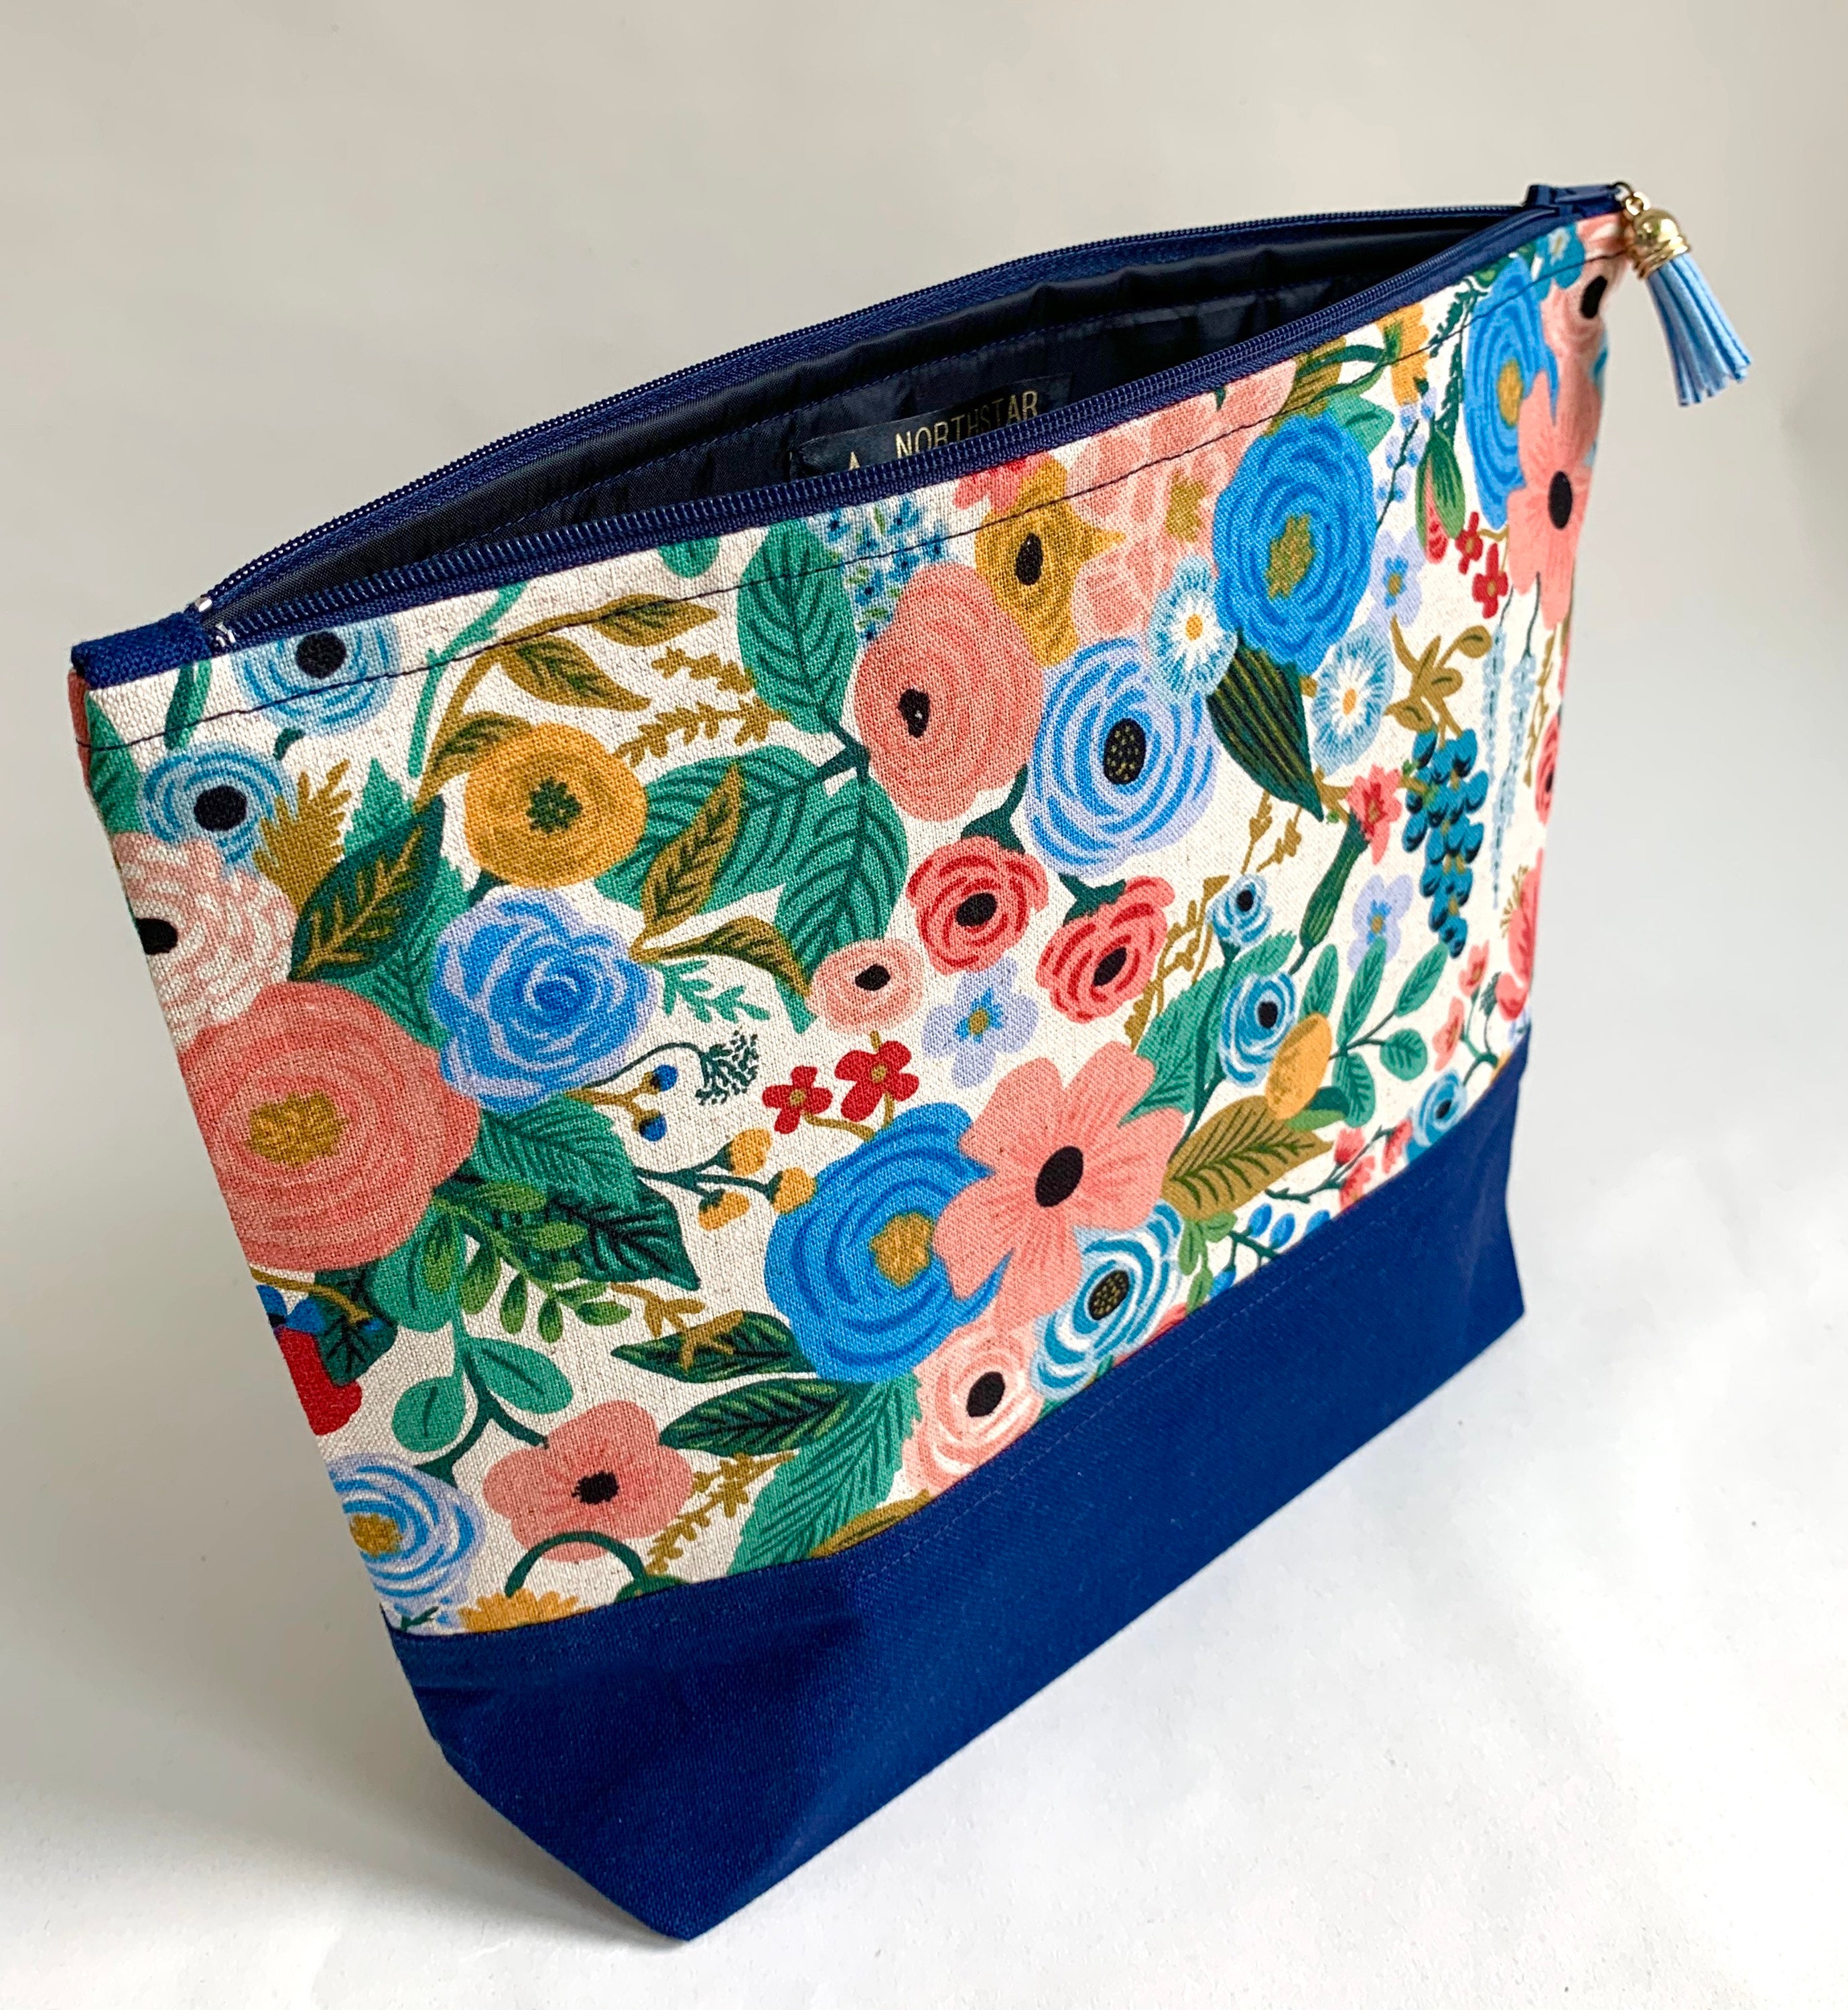 Handmade Large Navy Pink Floral Rifle Paper Co Print Make up Cosmetic  Toiletries Wash Bag Travel Zipper Pouch Makeup Gift Washbag 